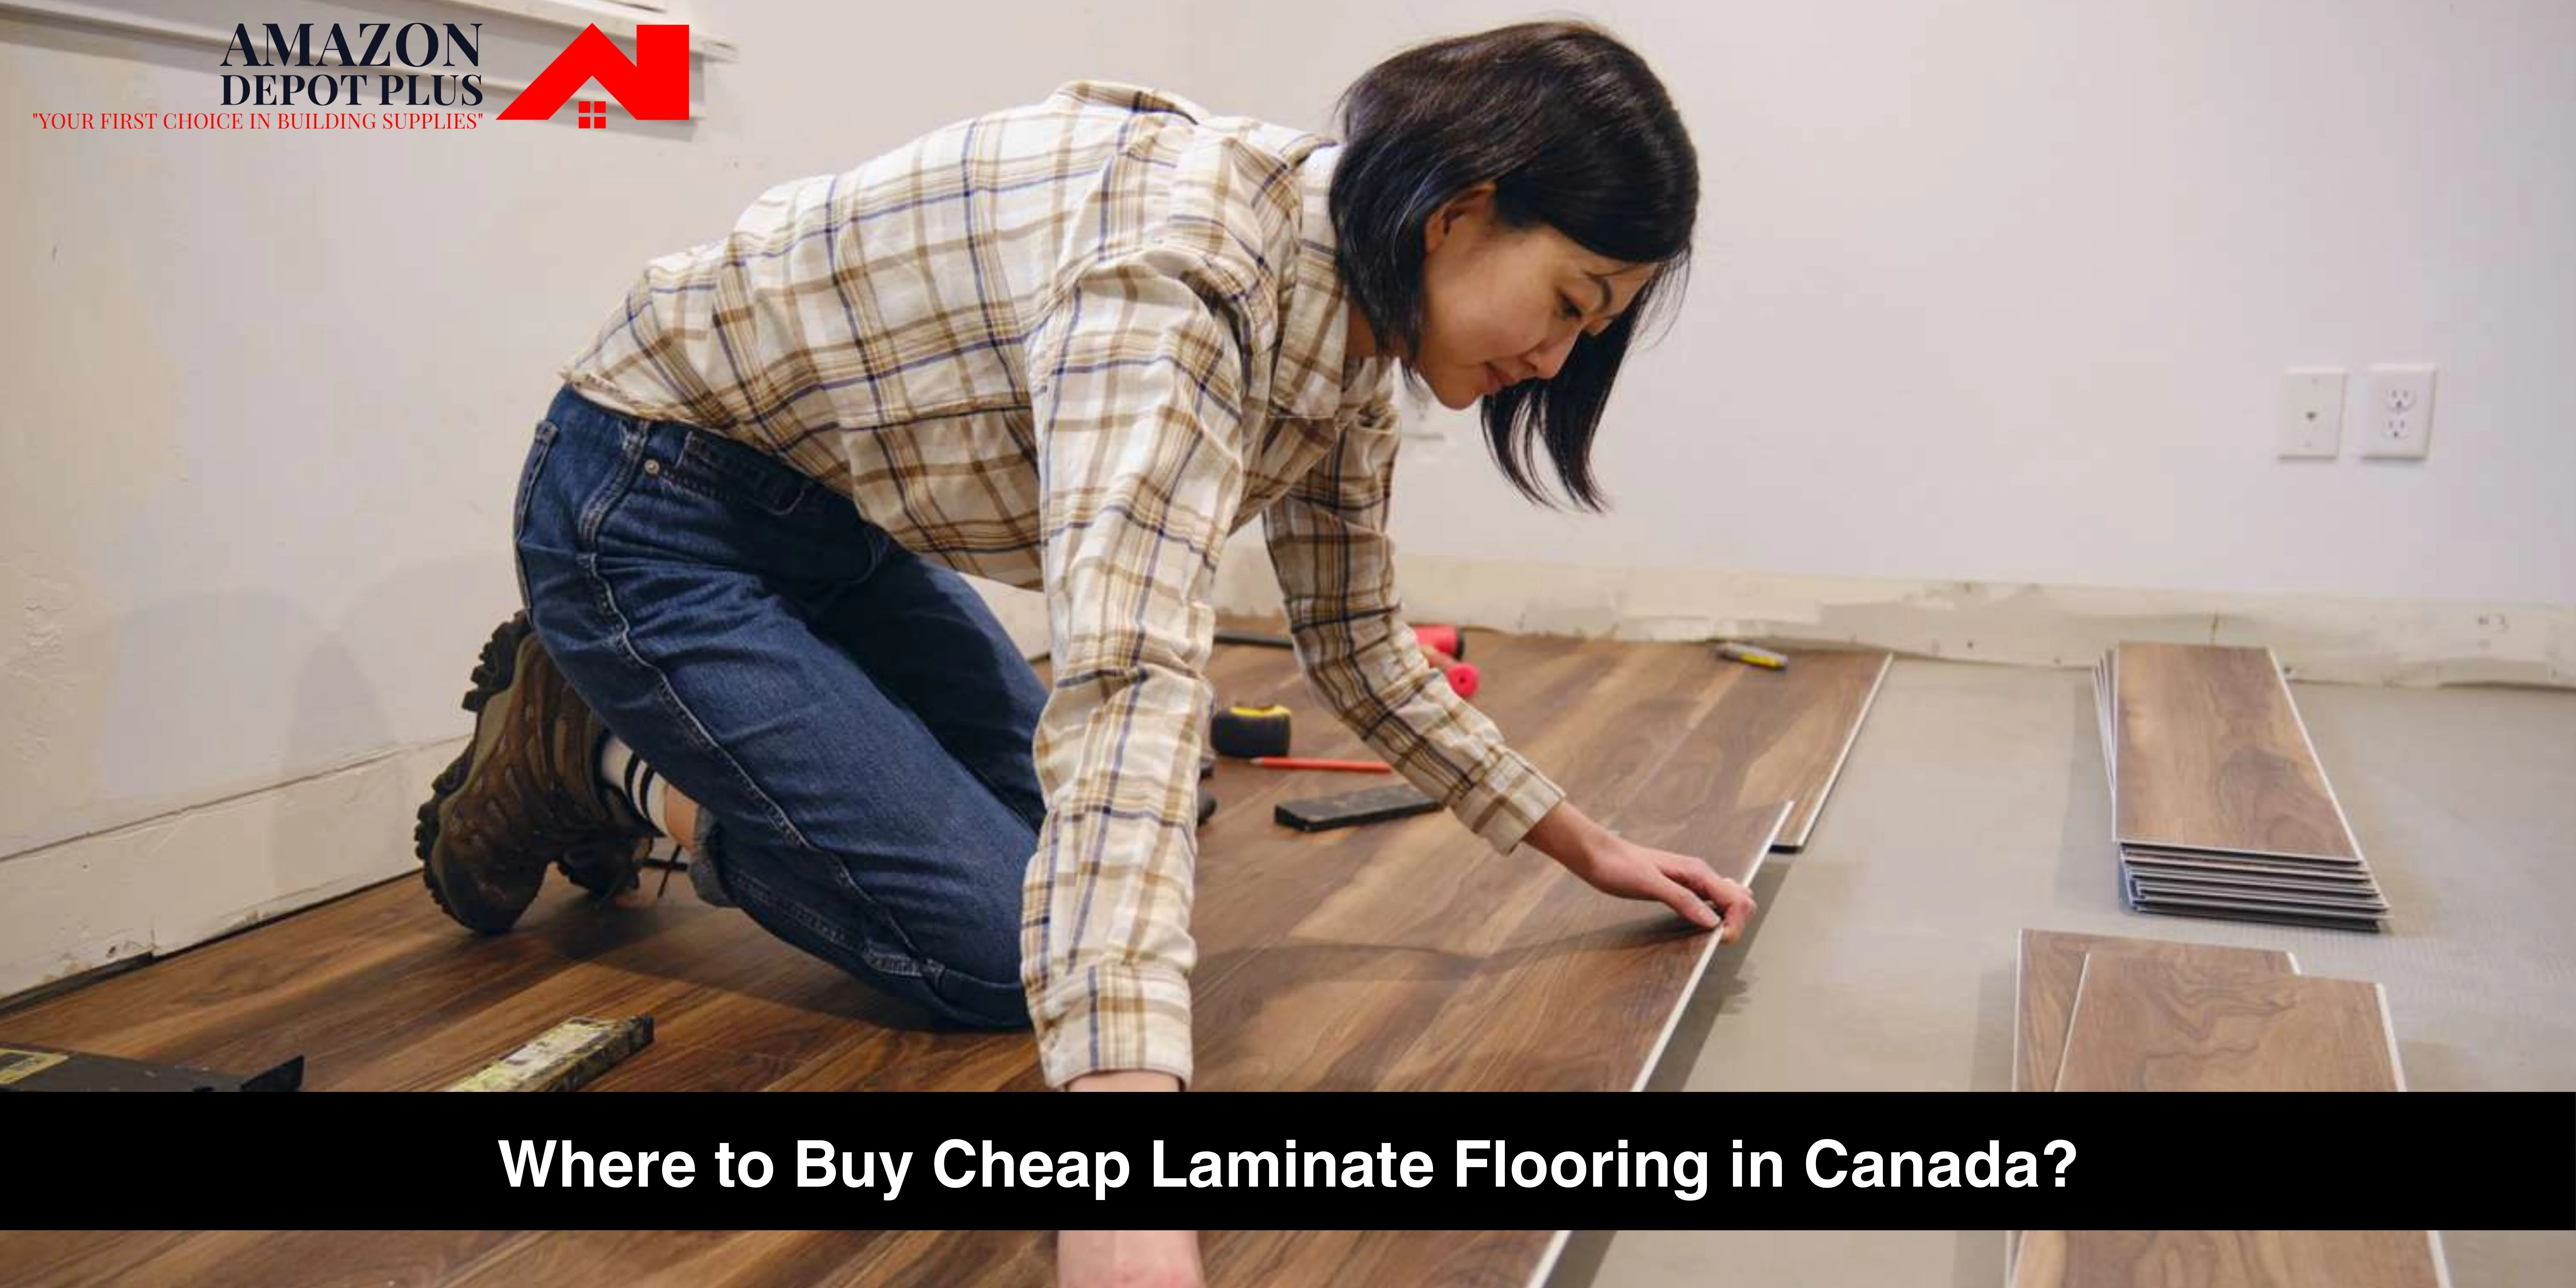 Where to Buy Cheap Laminate Flooring in Canada?